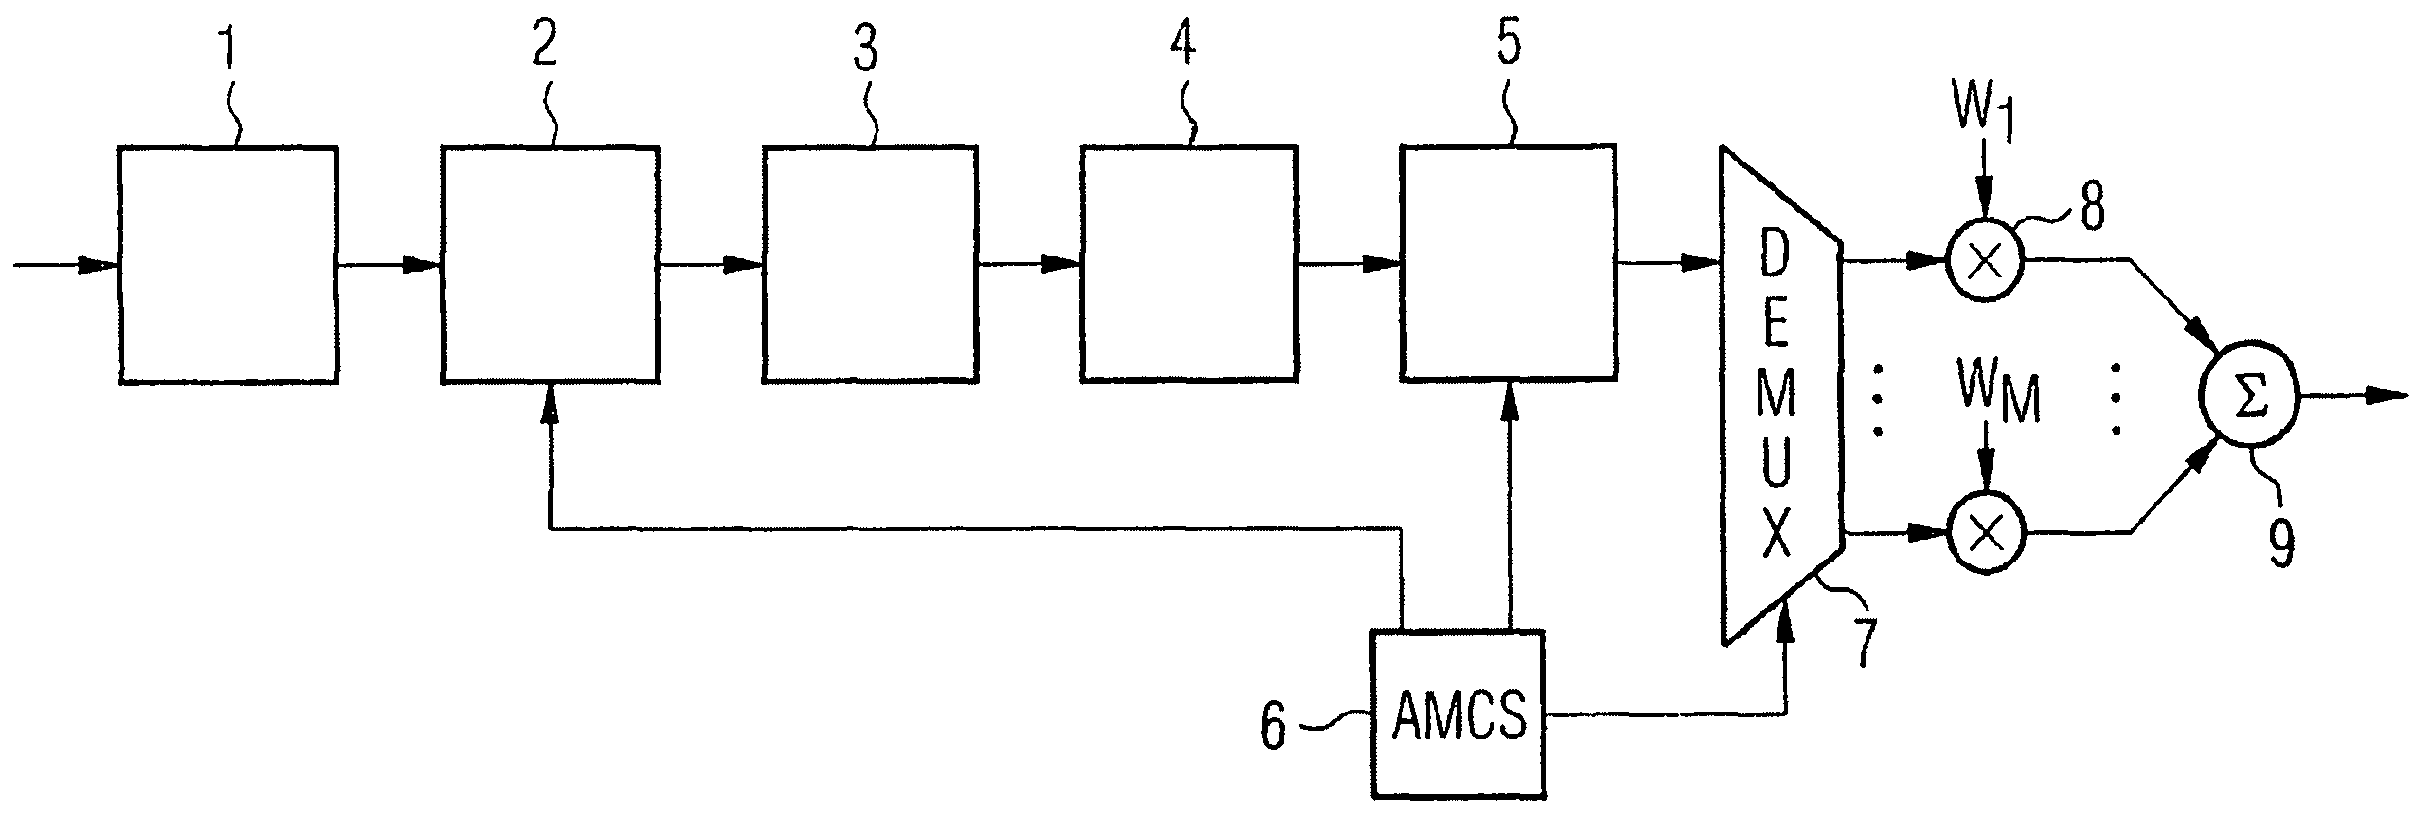 Method for matching the bit rate of a bit stream which is to be transmitted in a communication system and corresponding communication device